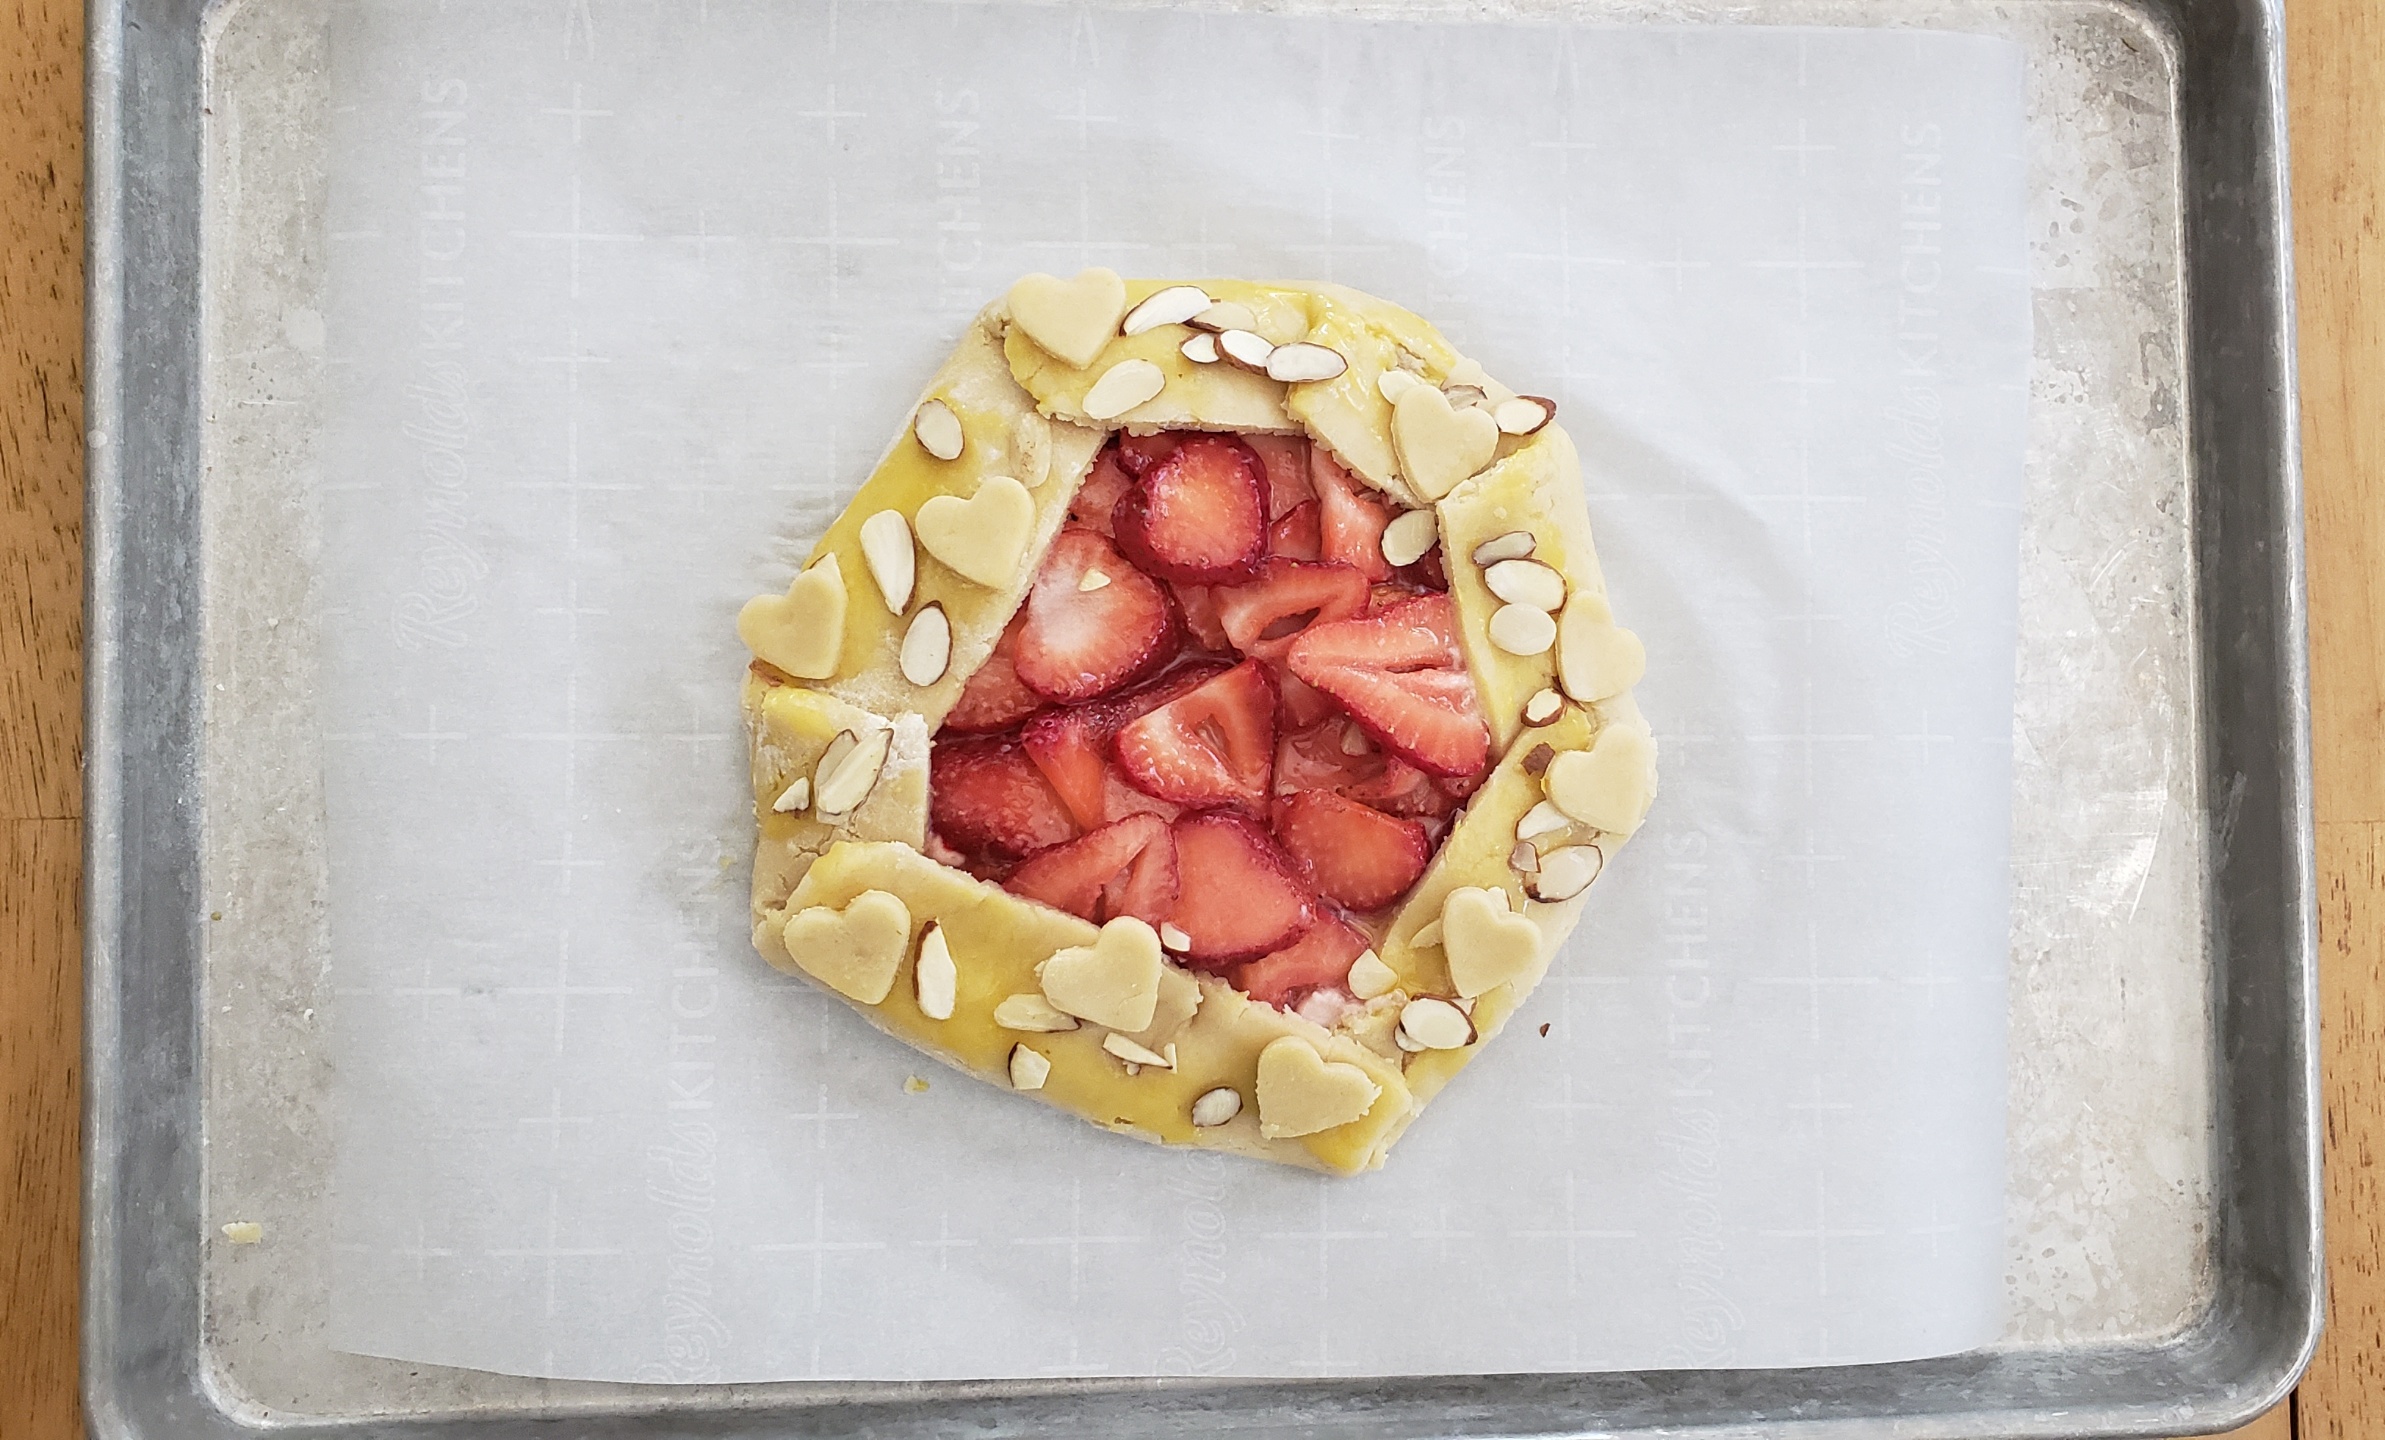 Strawberry Pie ready to be baked